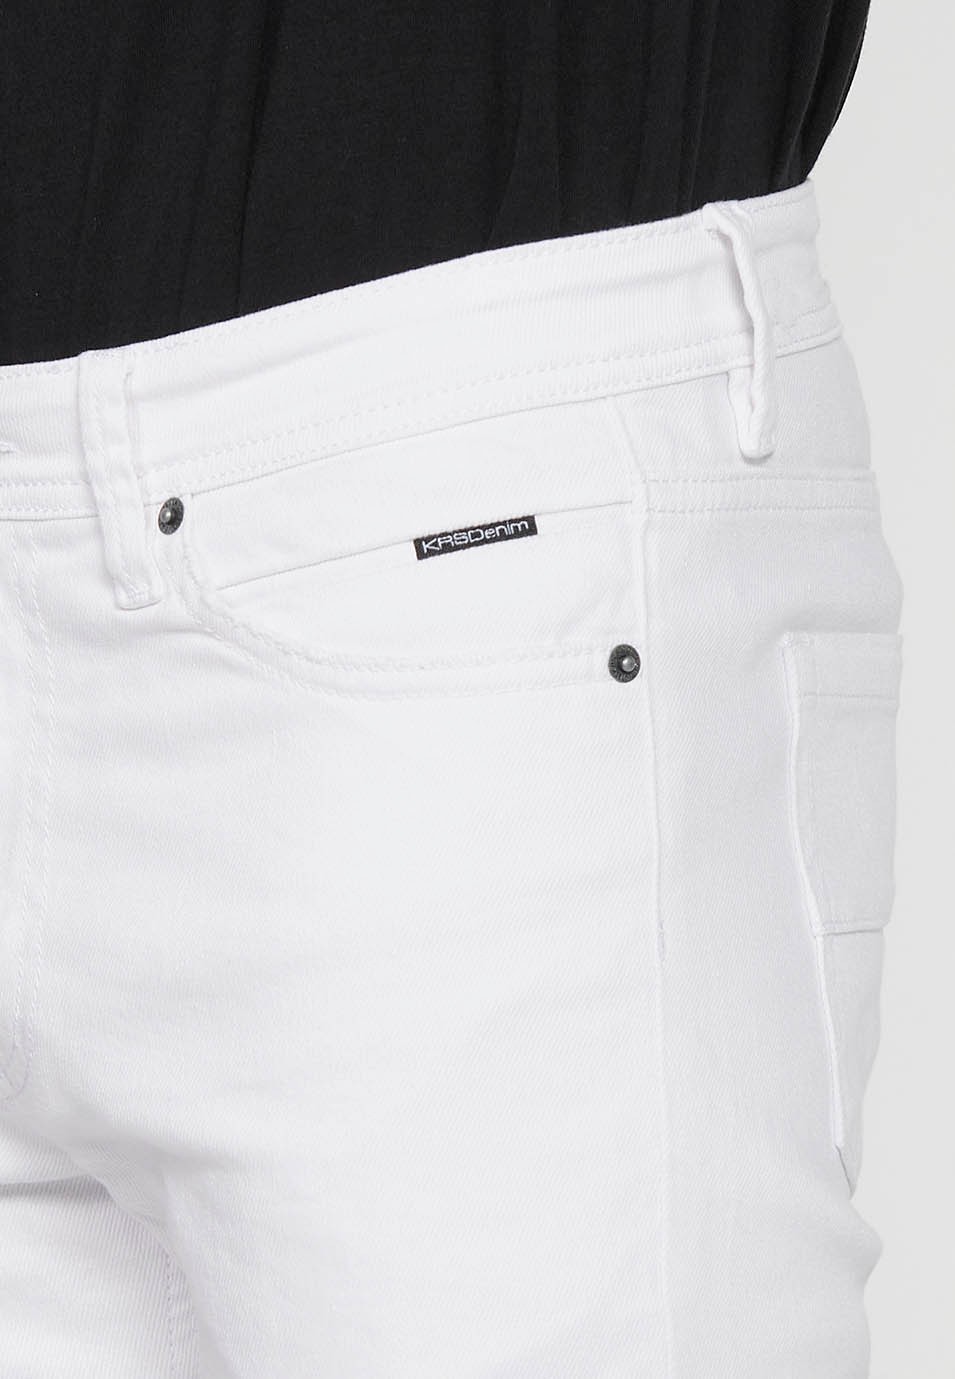 Super skinny jeans with front closure with zipper and button in White Denim for Men 1